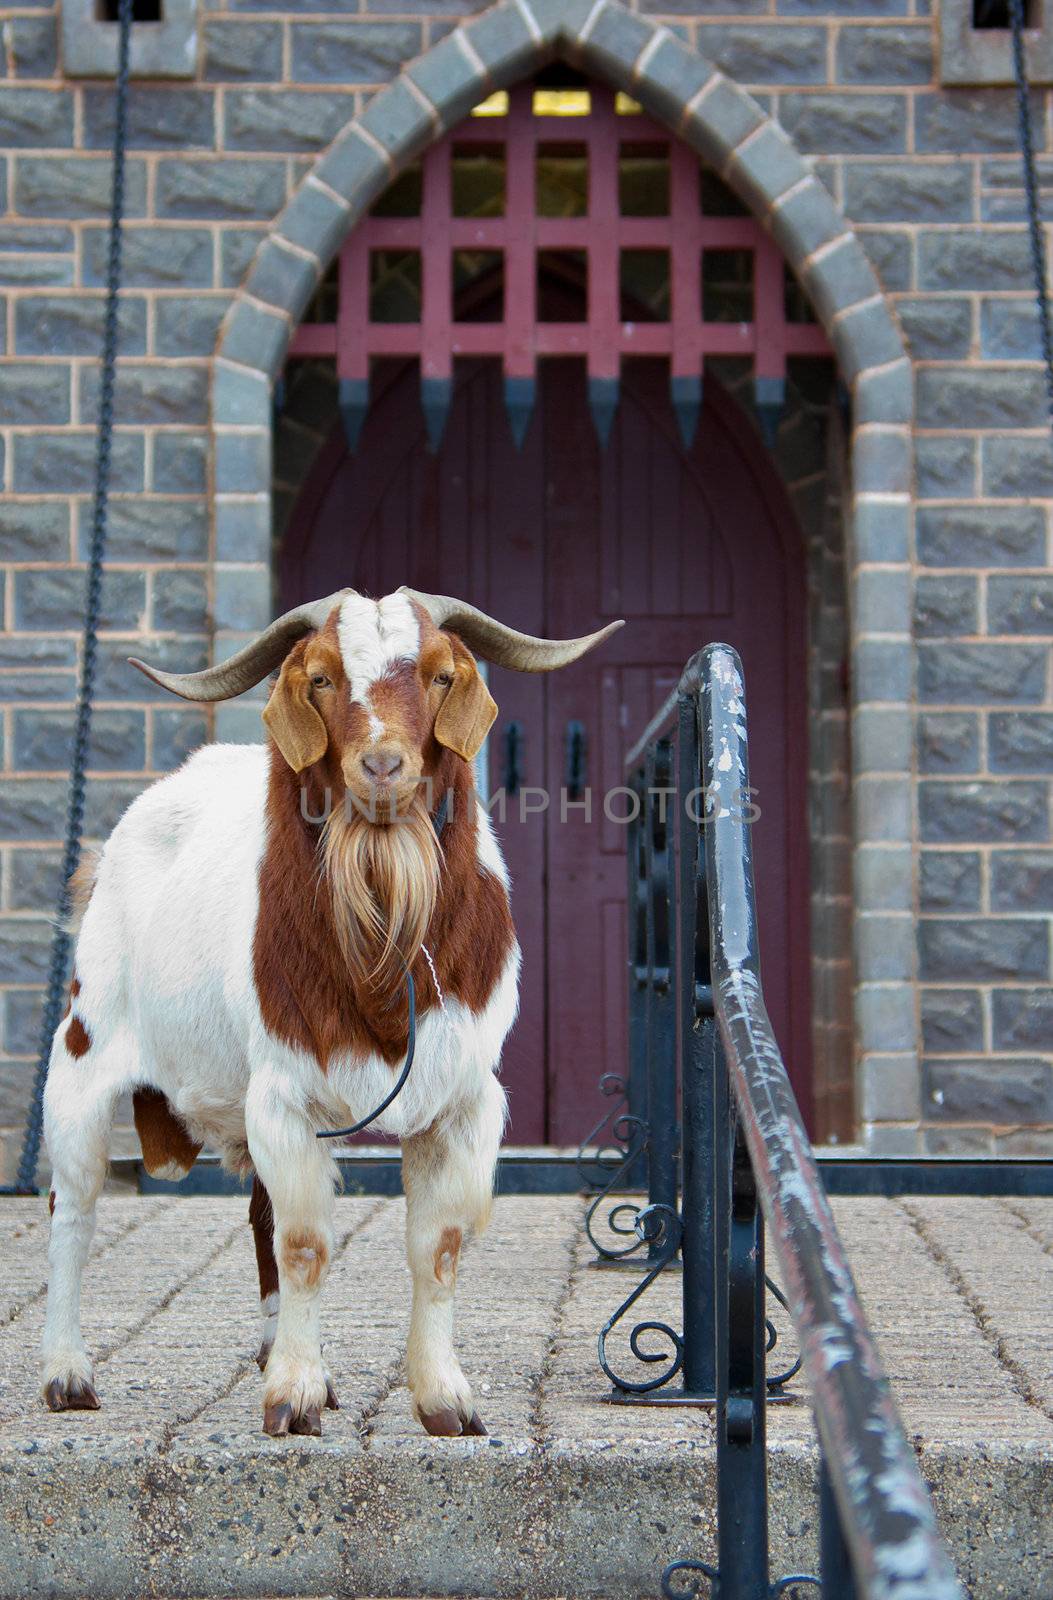 guard goat by clearviewstock